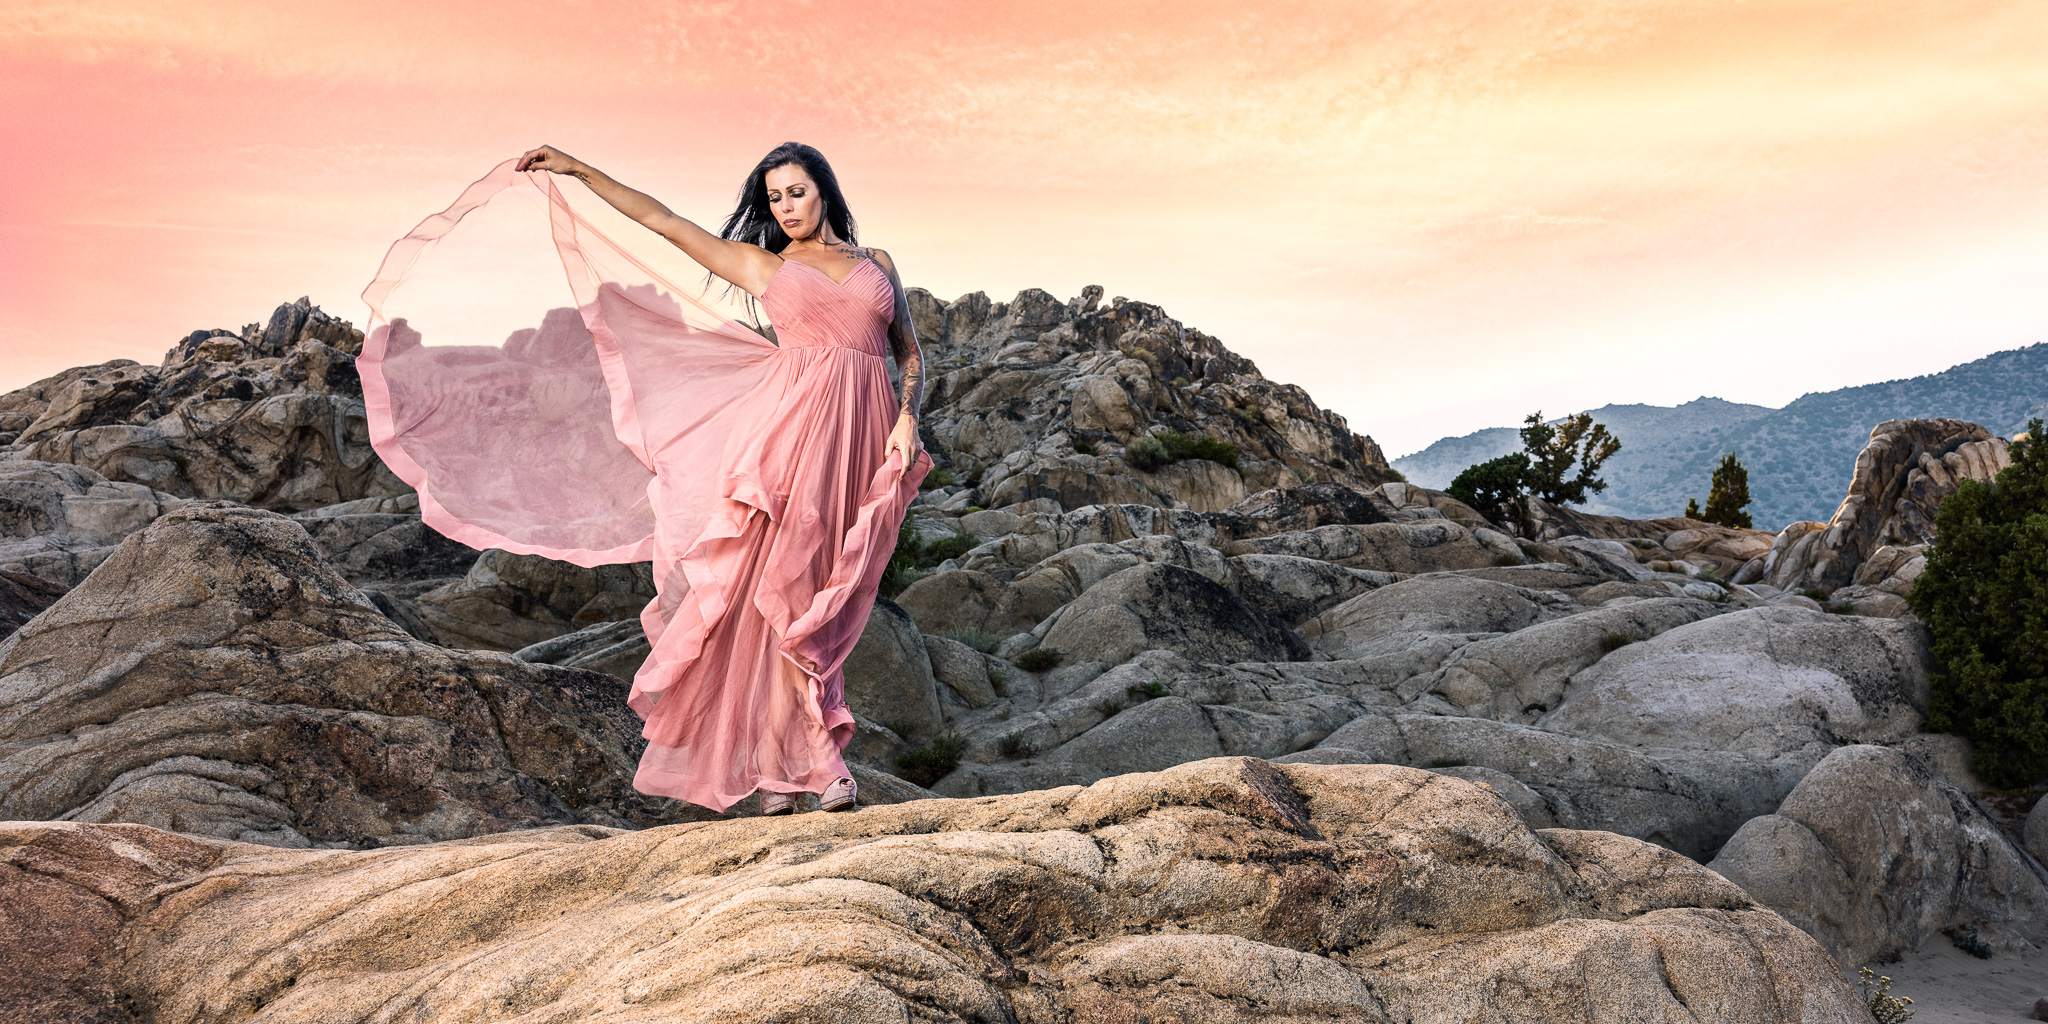 Commerical fashion photography of woman in desert